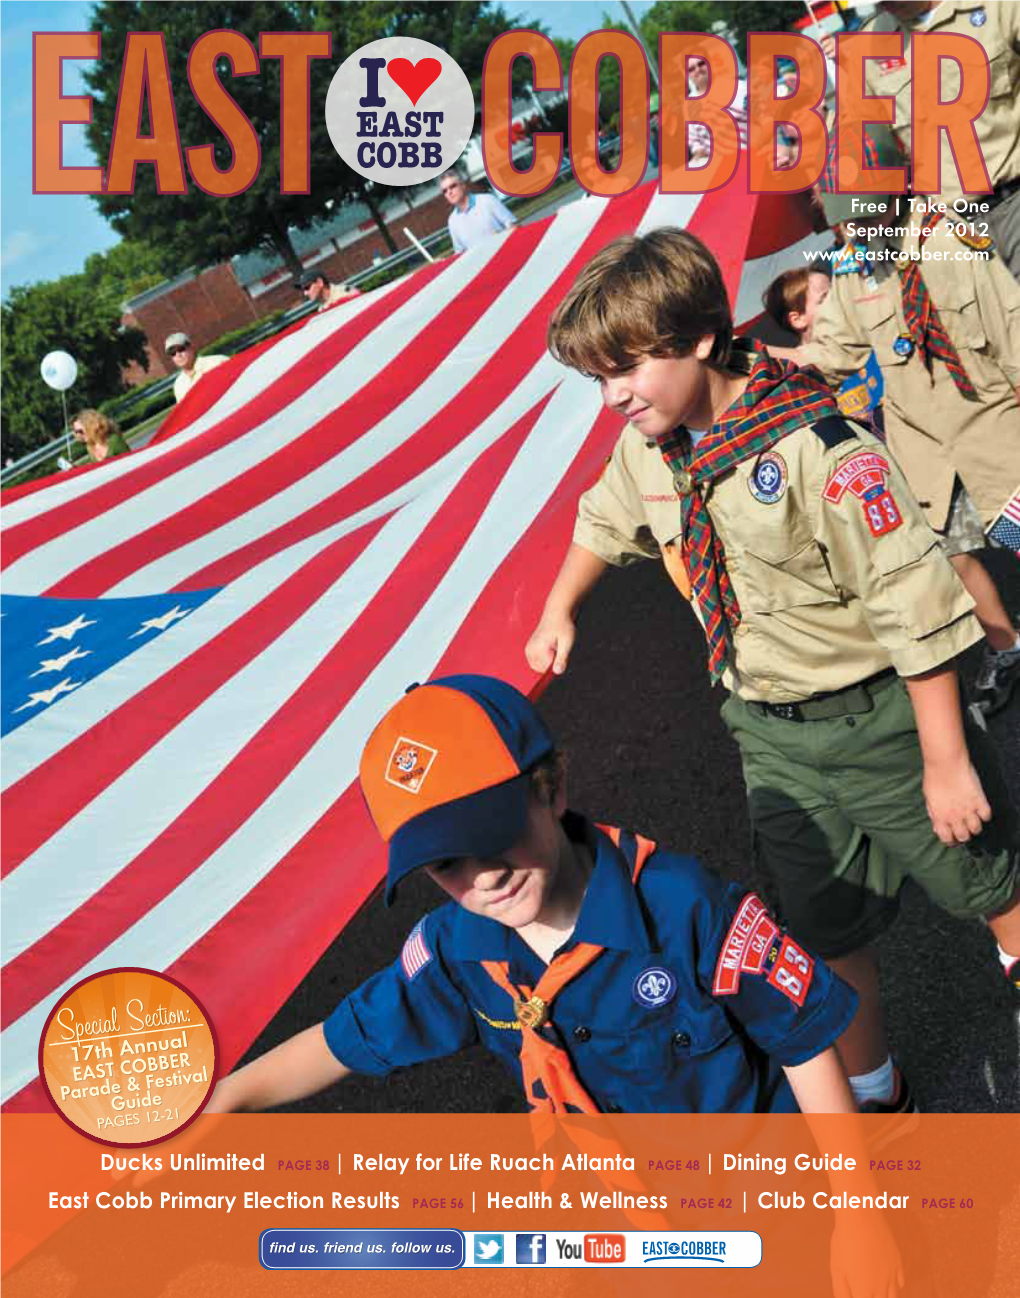 Special Section: 17Th Annual East Cobber Parade & Festival Guide PAGES 12-21